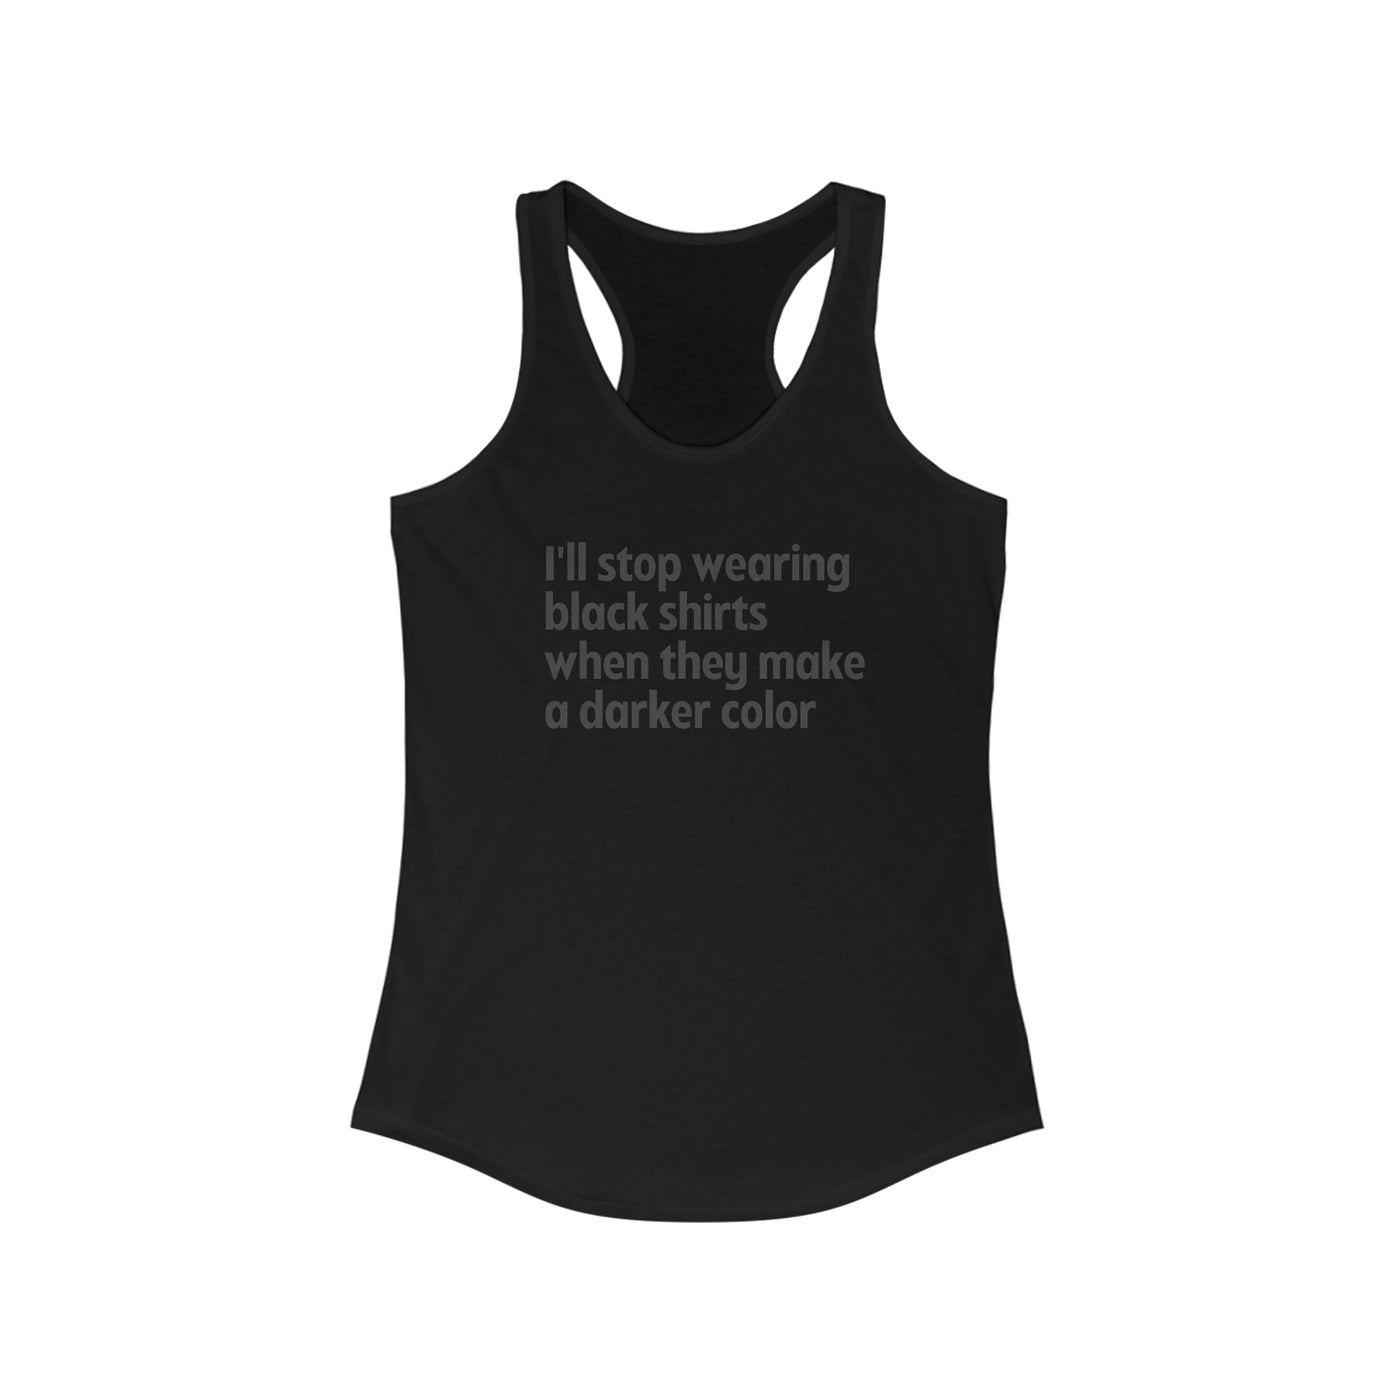 I'll Stop Wearing Black Shirts When They Make A Darker Color Women's Racerback Tank